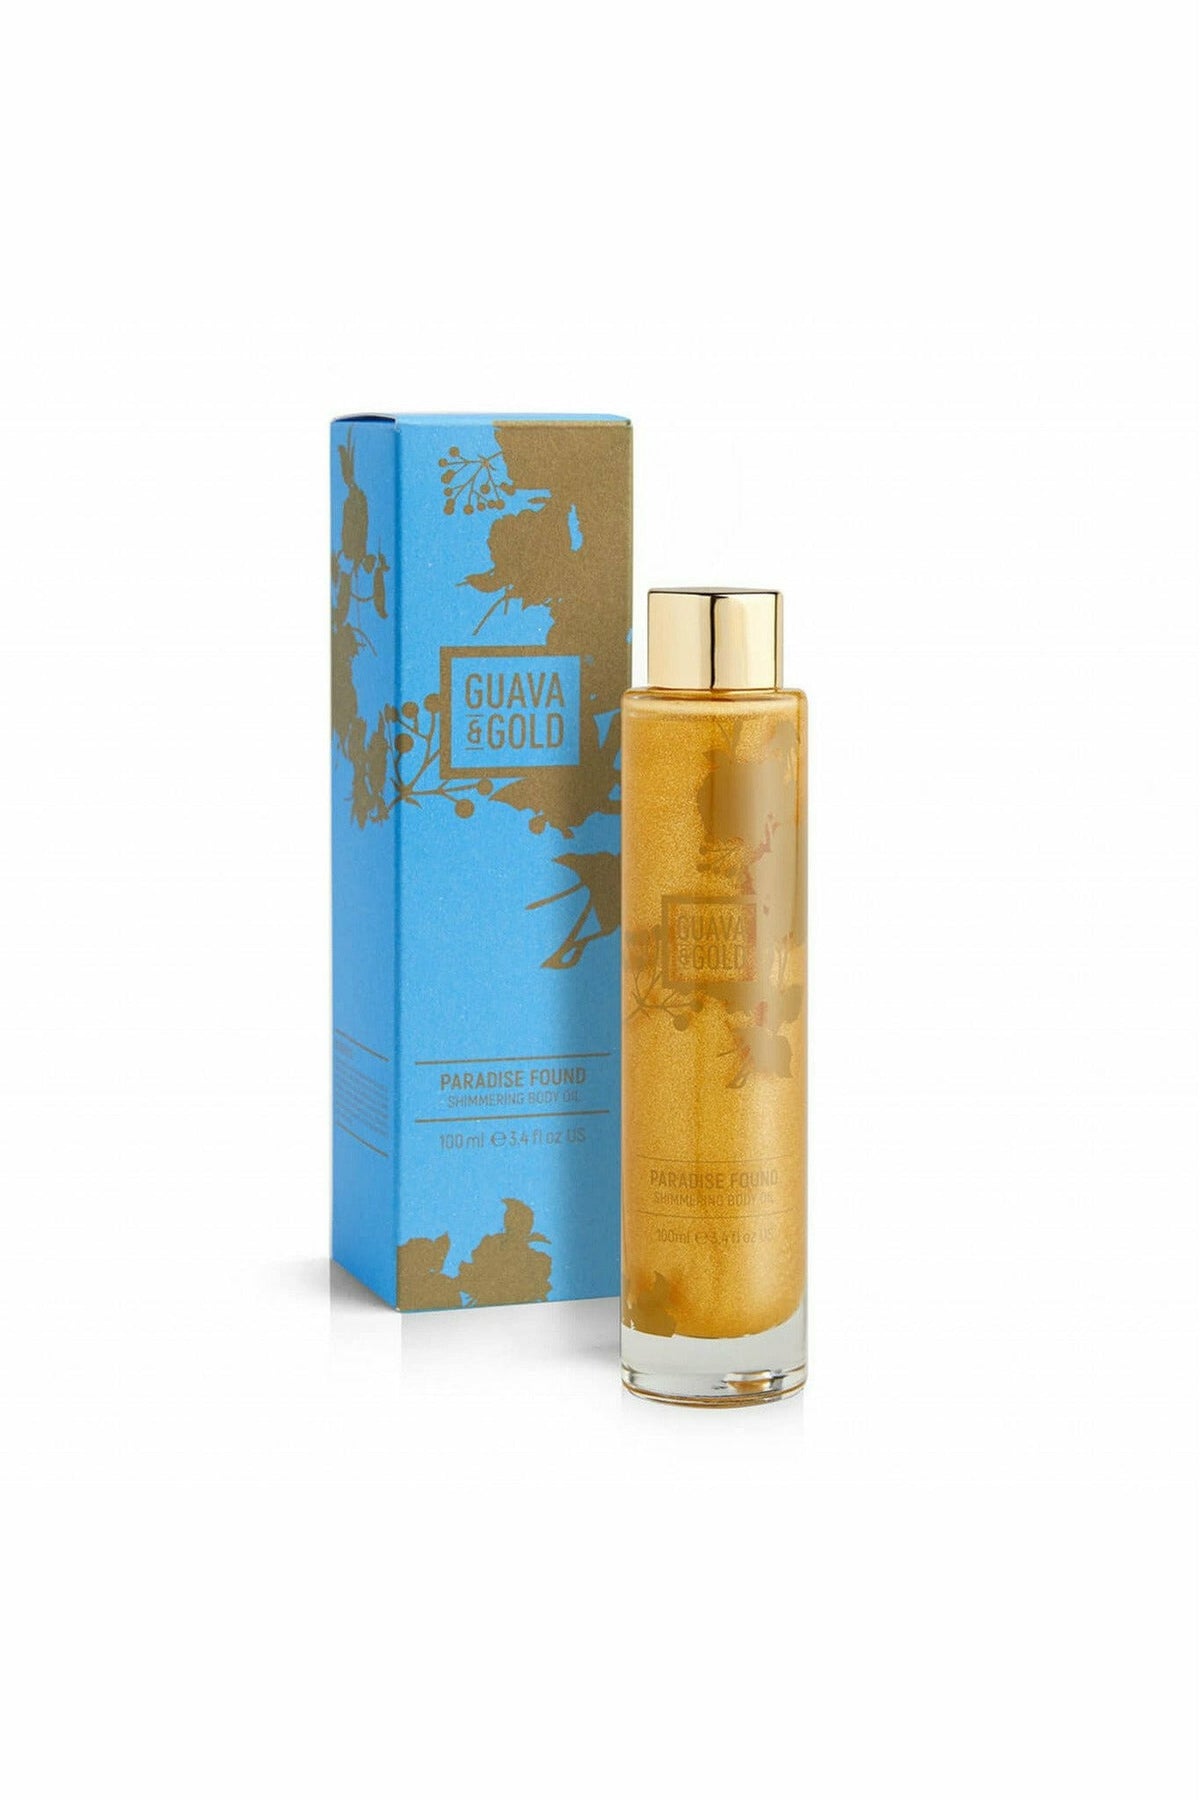 Paradise Found Shimmering Body Oil 2843430